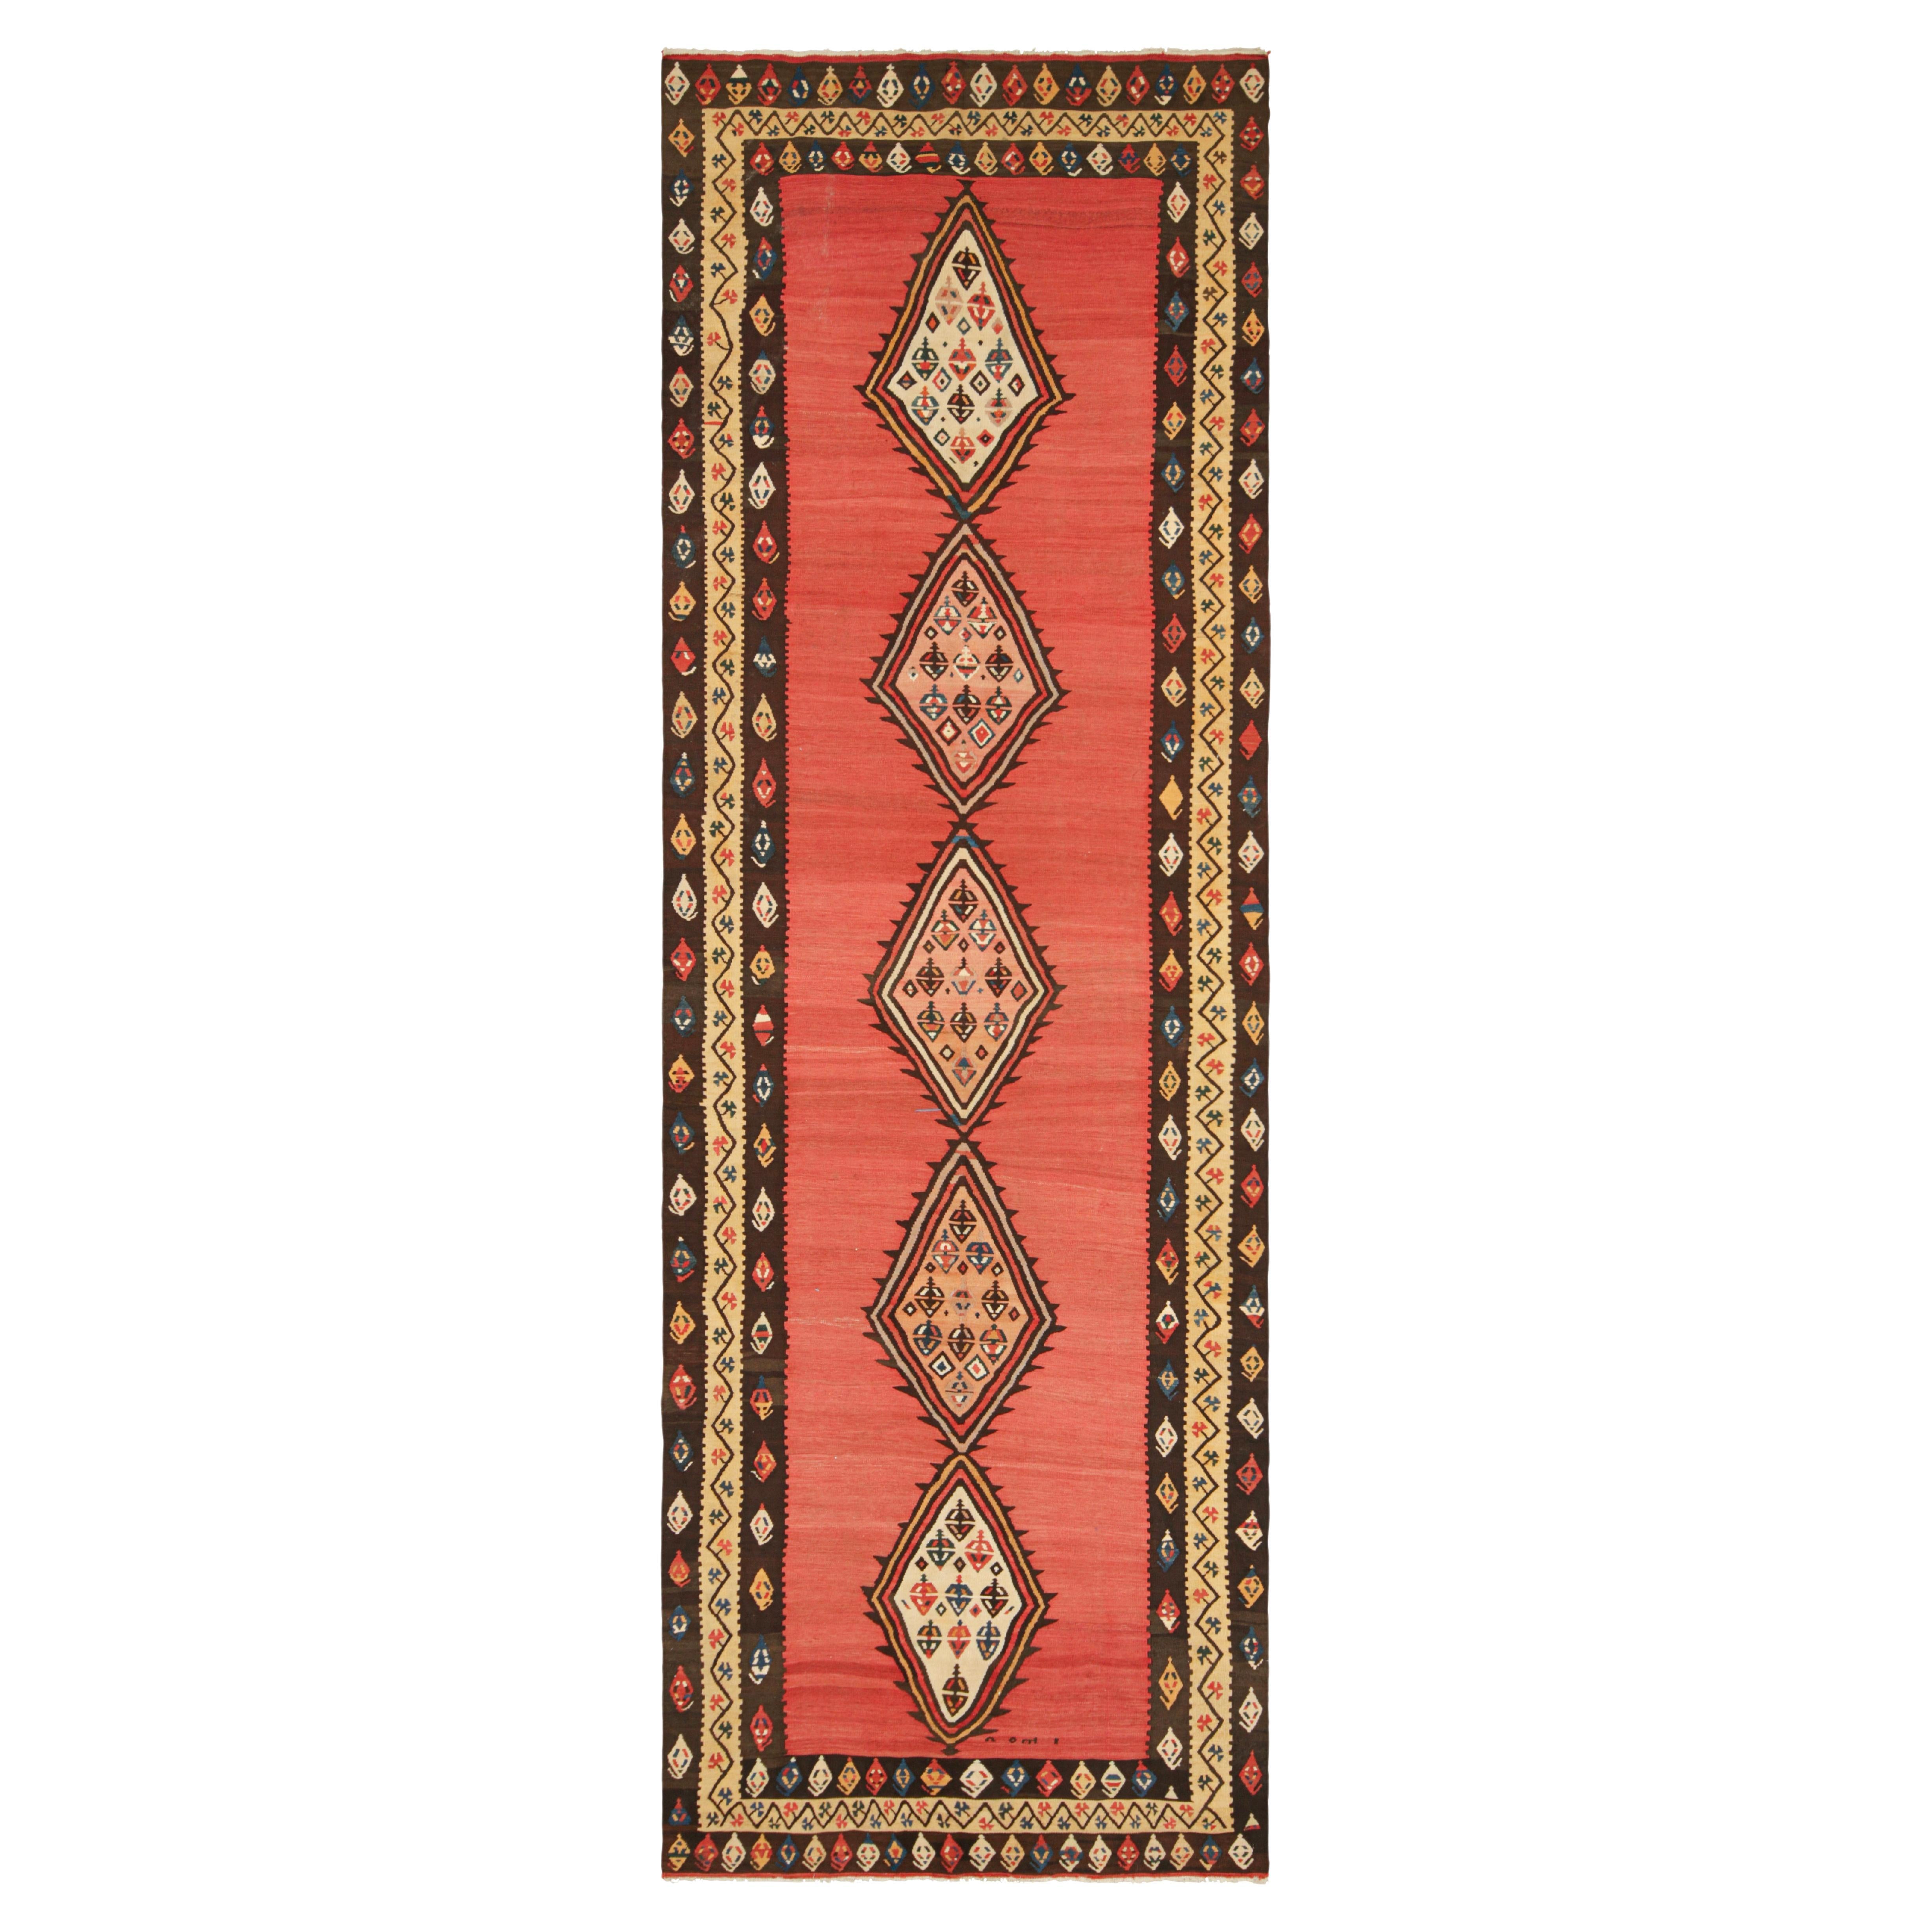 Vintage Kilim Runner in Red Open Field with Medallions, from Rug & Kilim